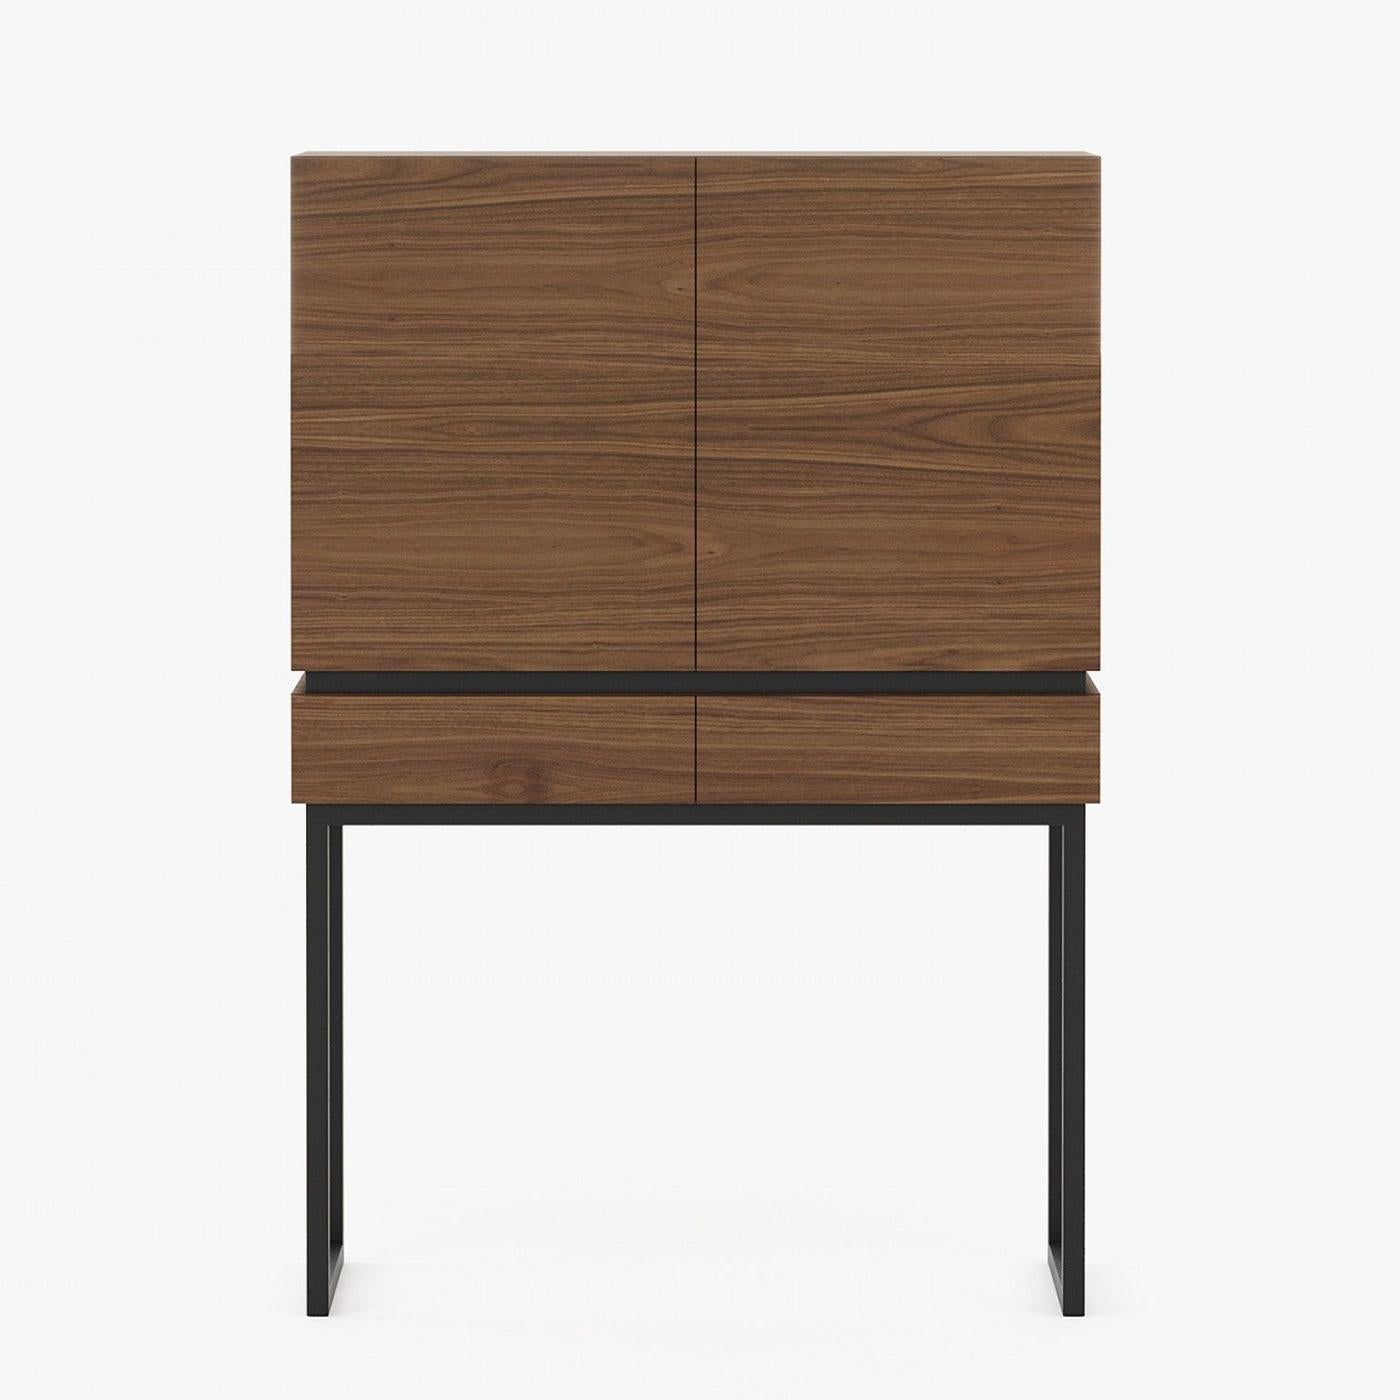 Bar cabinet Allan with wooden structure in walnut matte
veneer. Bar with 2 doors and 4 storage parts inside. Bar
with 2 drawers with easy glide system. Base structure in
polished stainless steel in black matte lacquered finish.